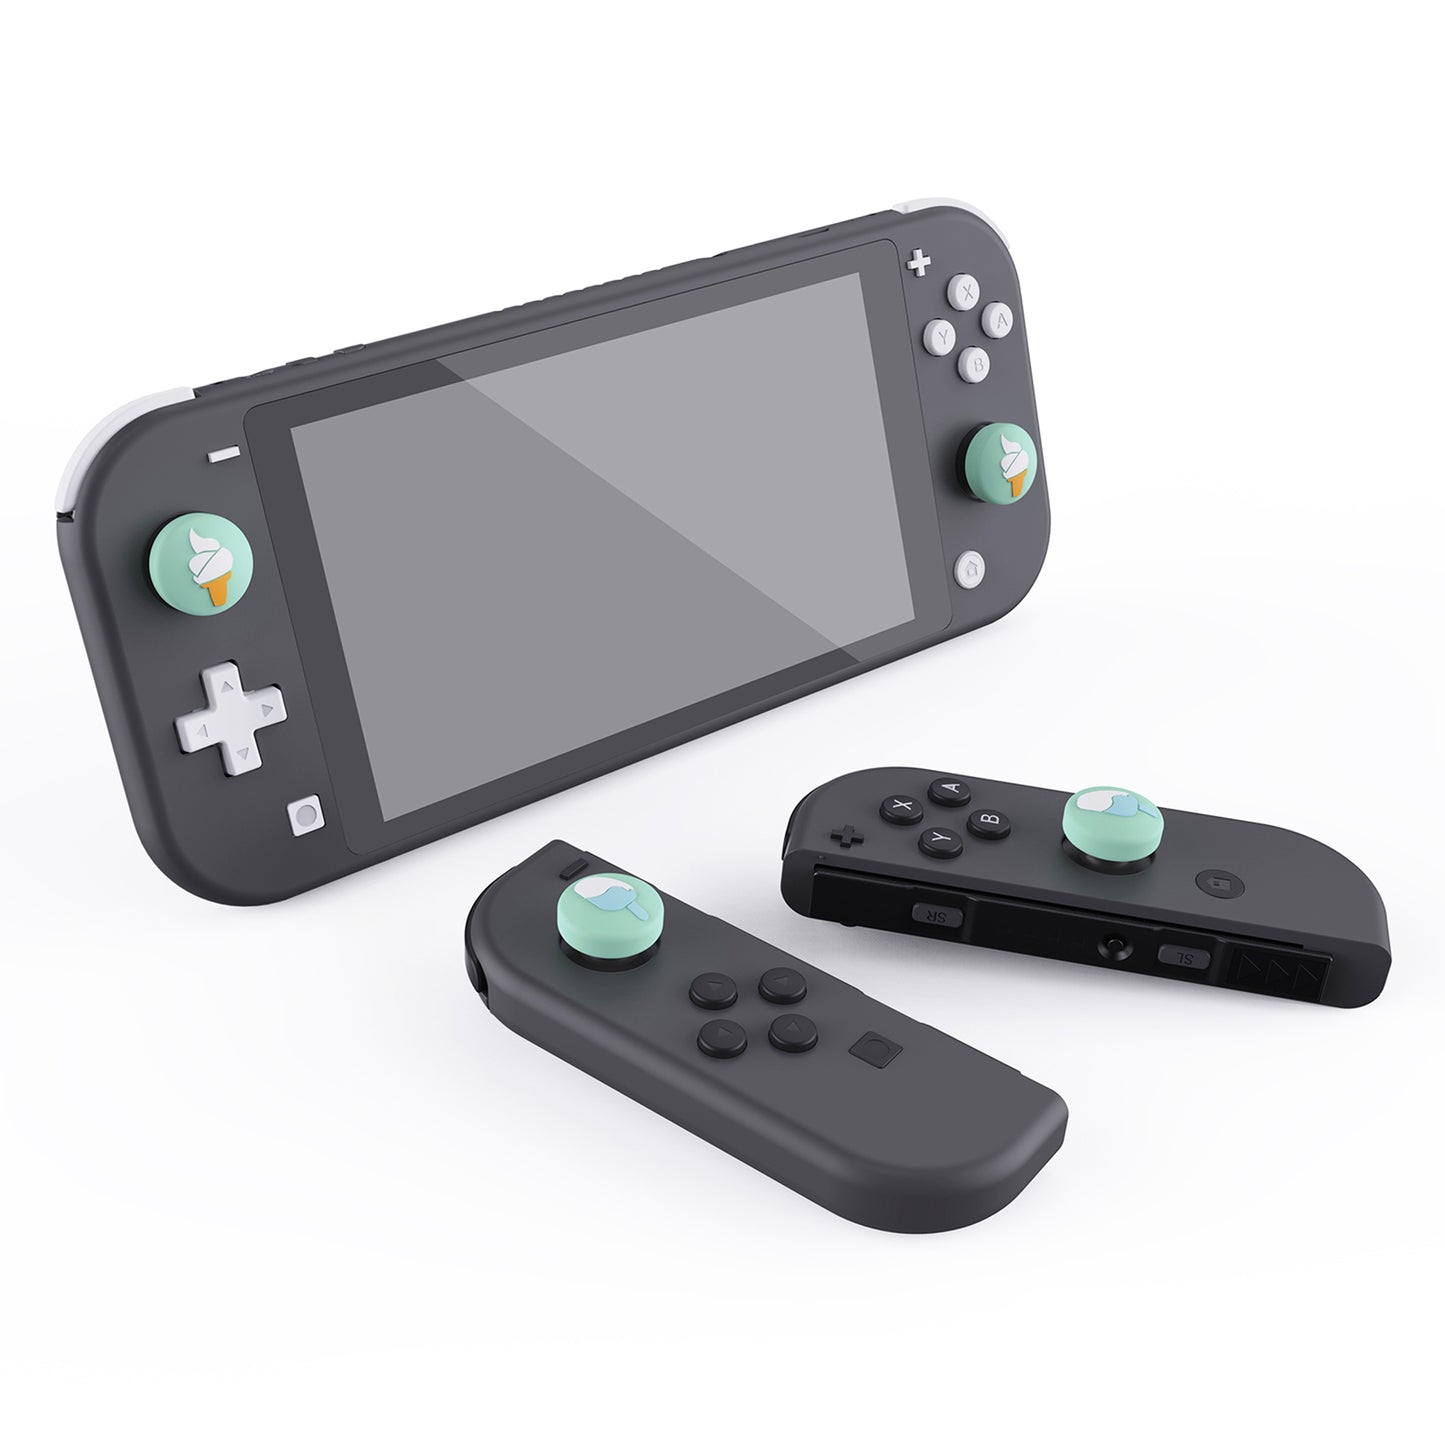 PlayVital Ice Cream Cute Switch Thumb Grip Caps, Joystick Caps for Nintendo Switch Lite, Silicone Analog Cover Thumbstick Grips for Switch OLED Joycon - Seafoam Green - NJM1103 playvital